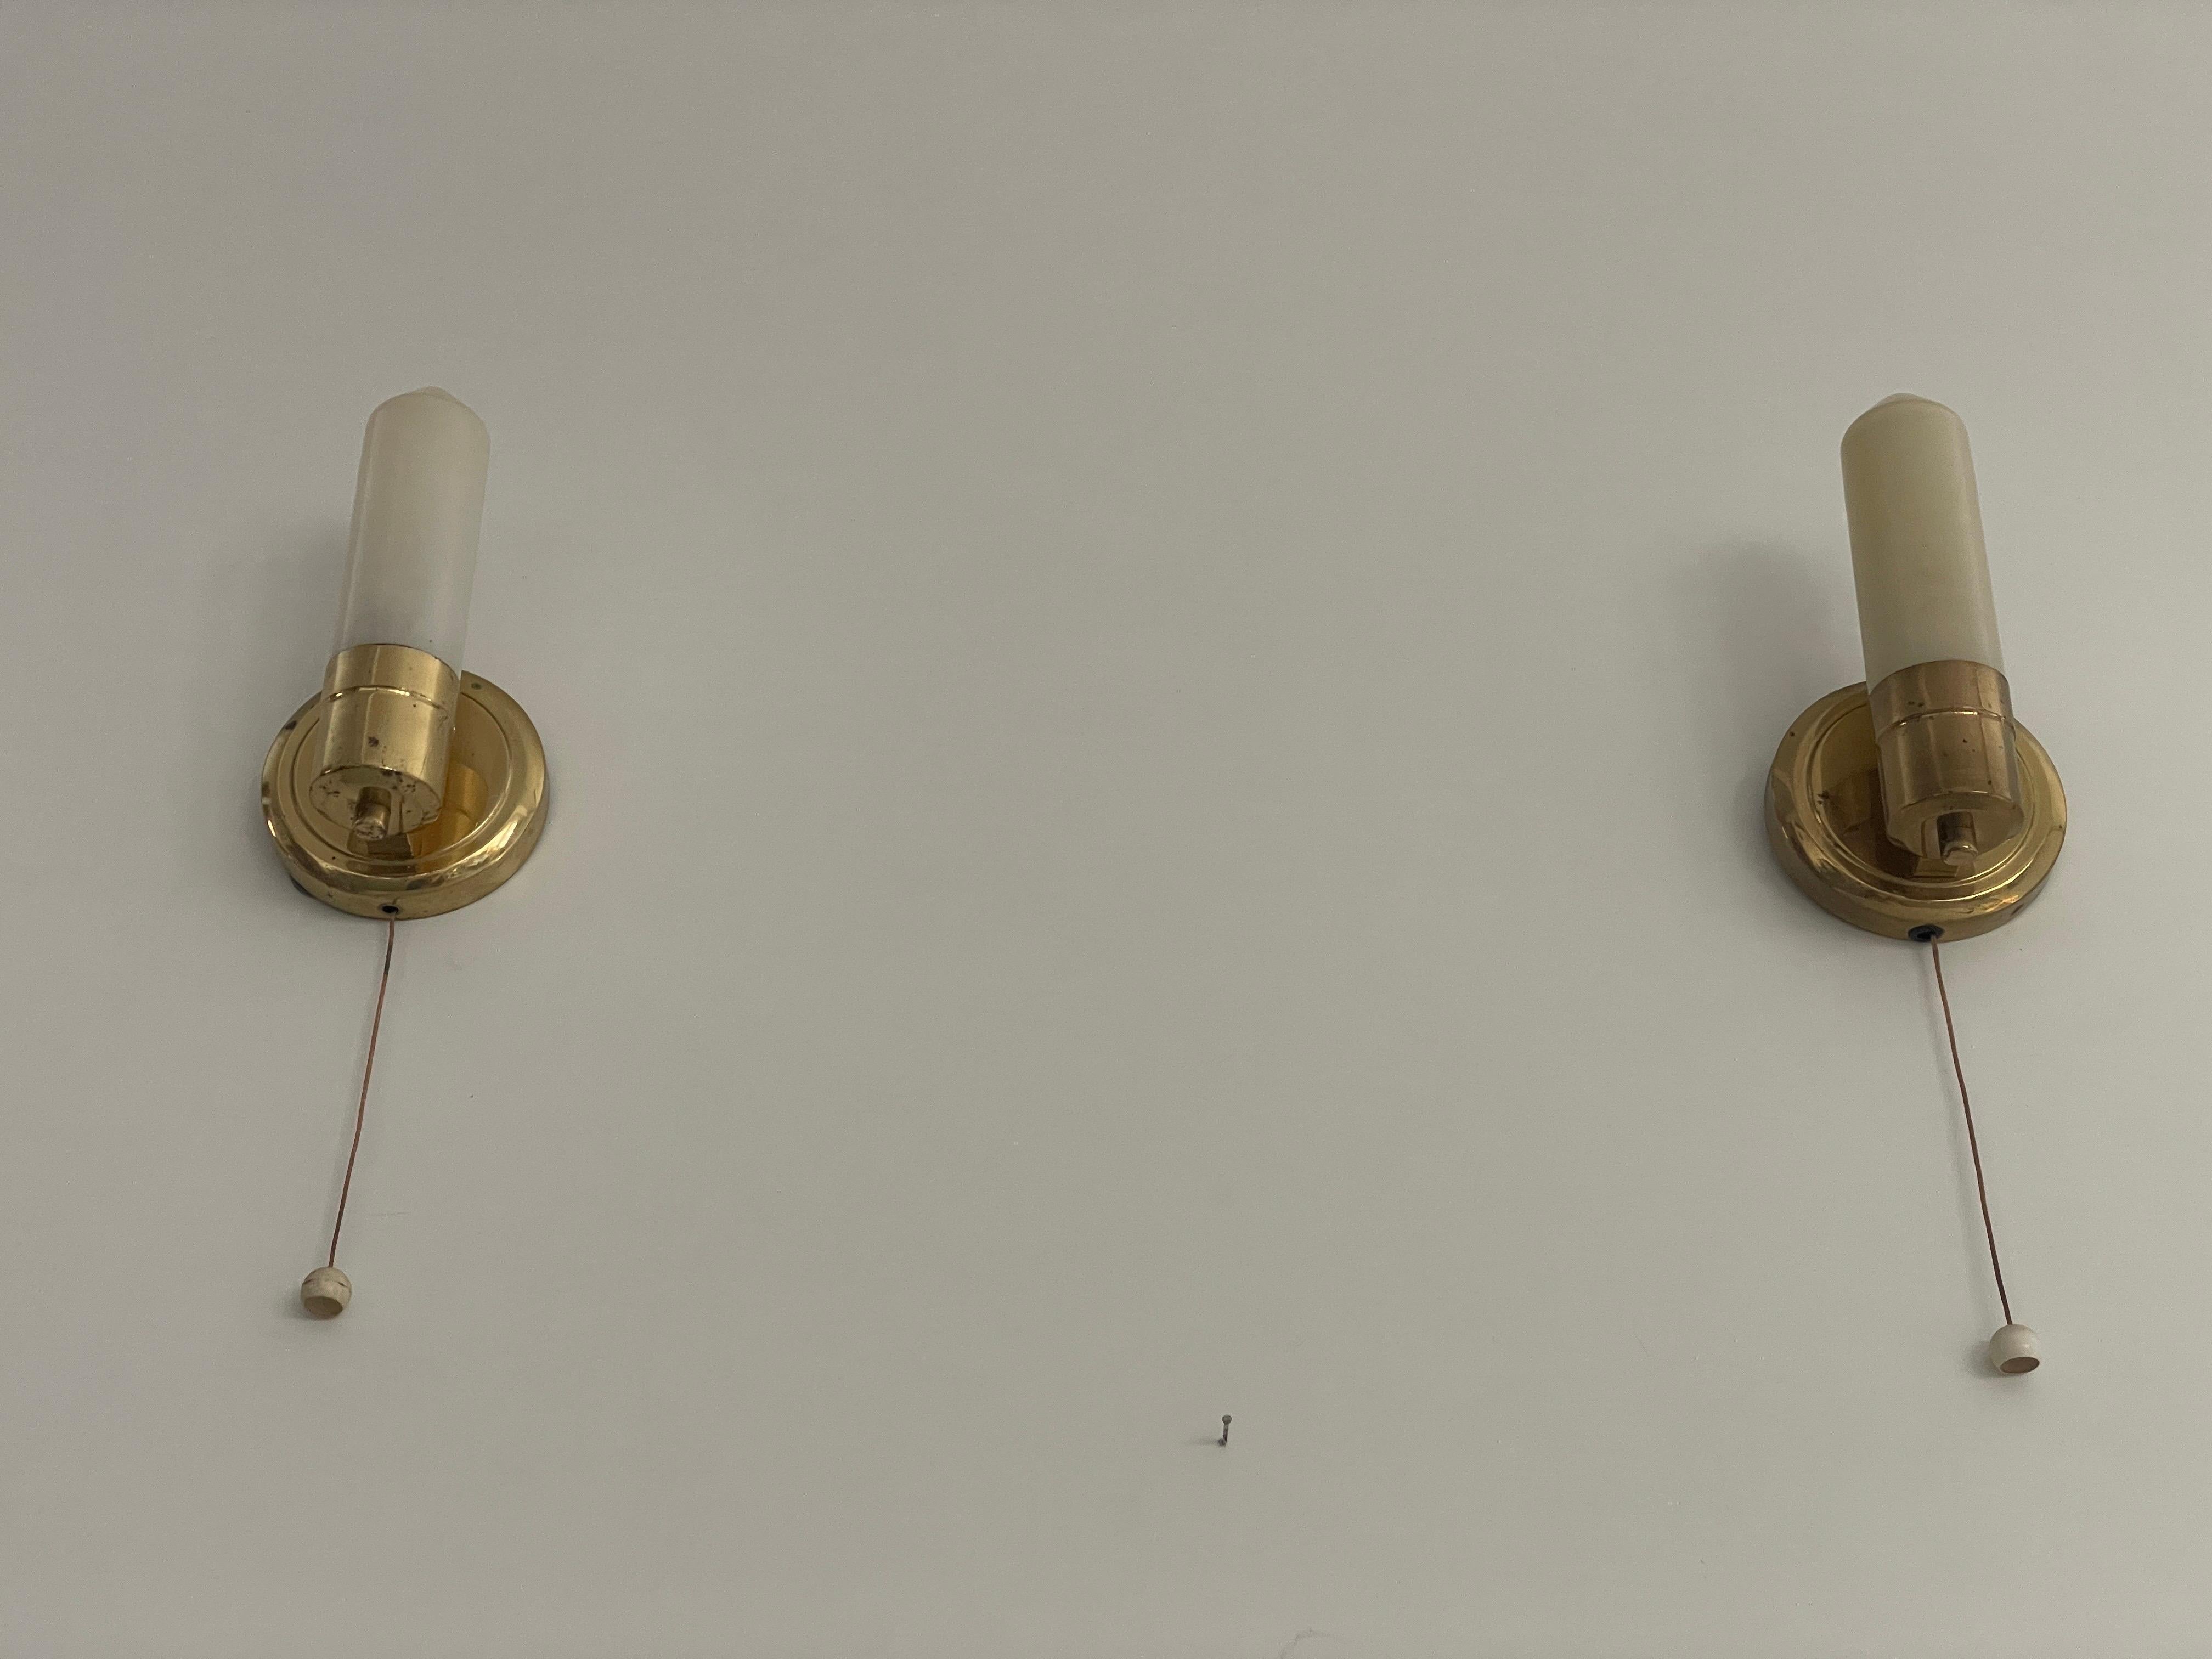 Art Deco Opaline Glass and Brass Sconces, 1940s, Germany
Lampshades are in very good vintage condition.


This lamp works with E14 light bulb. Max 100W
Wired and suitable to use with 220V and 110V for all countries.


Measurements:
Height: 19